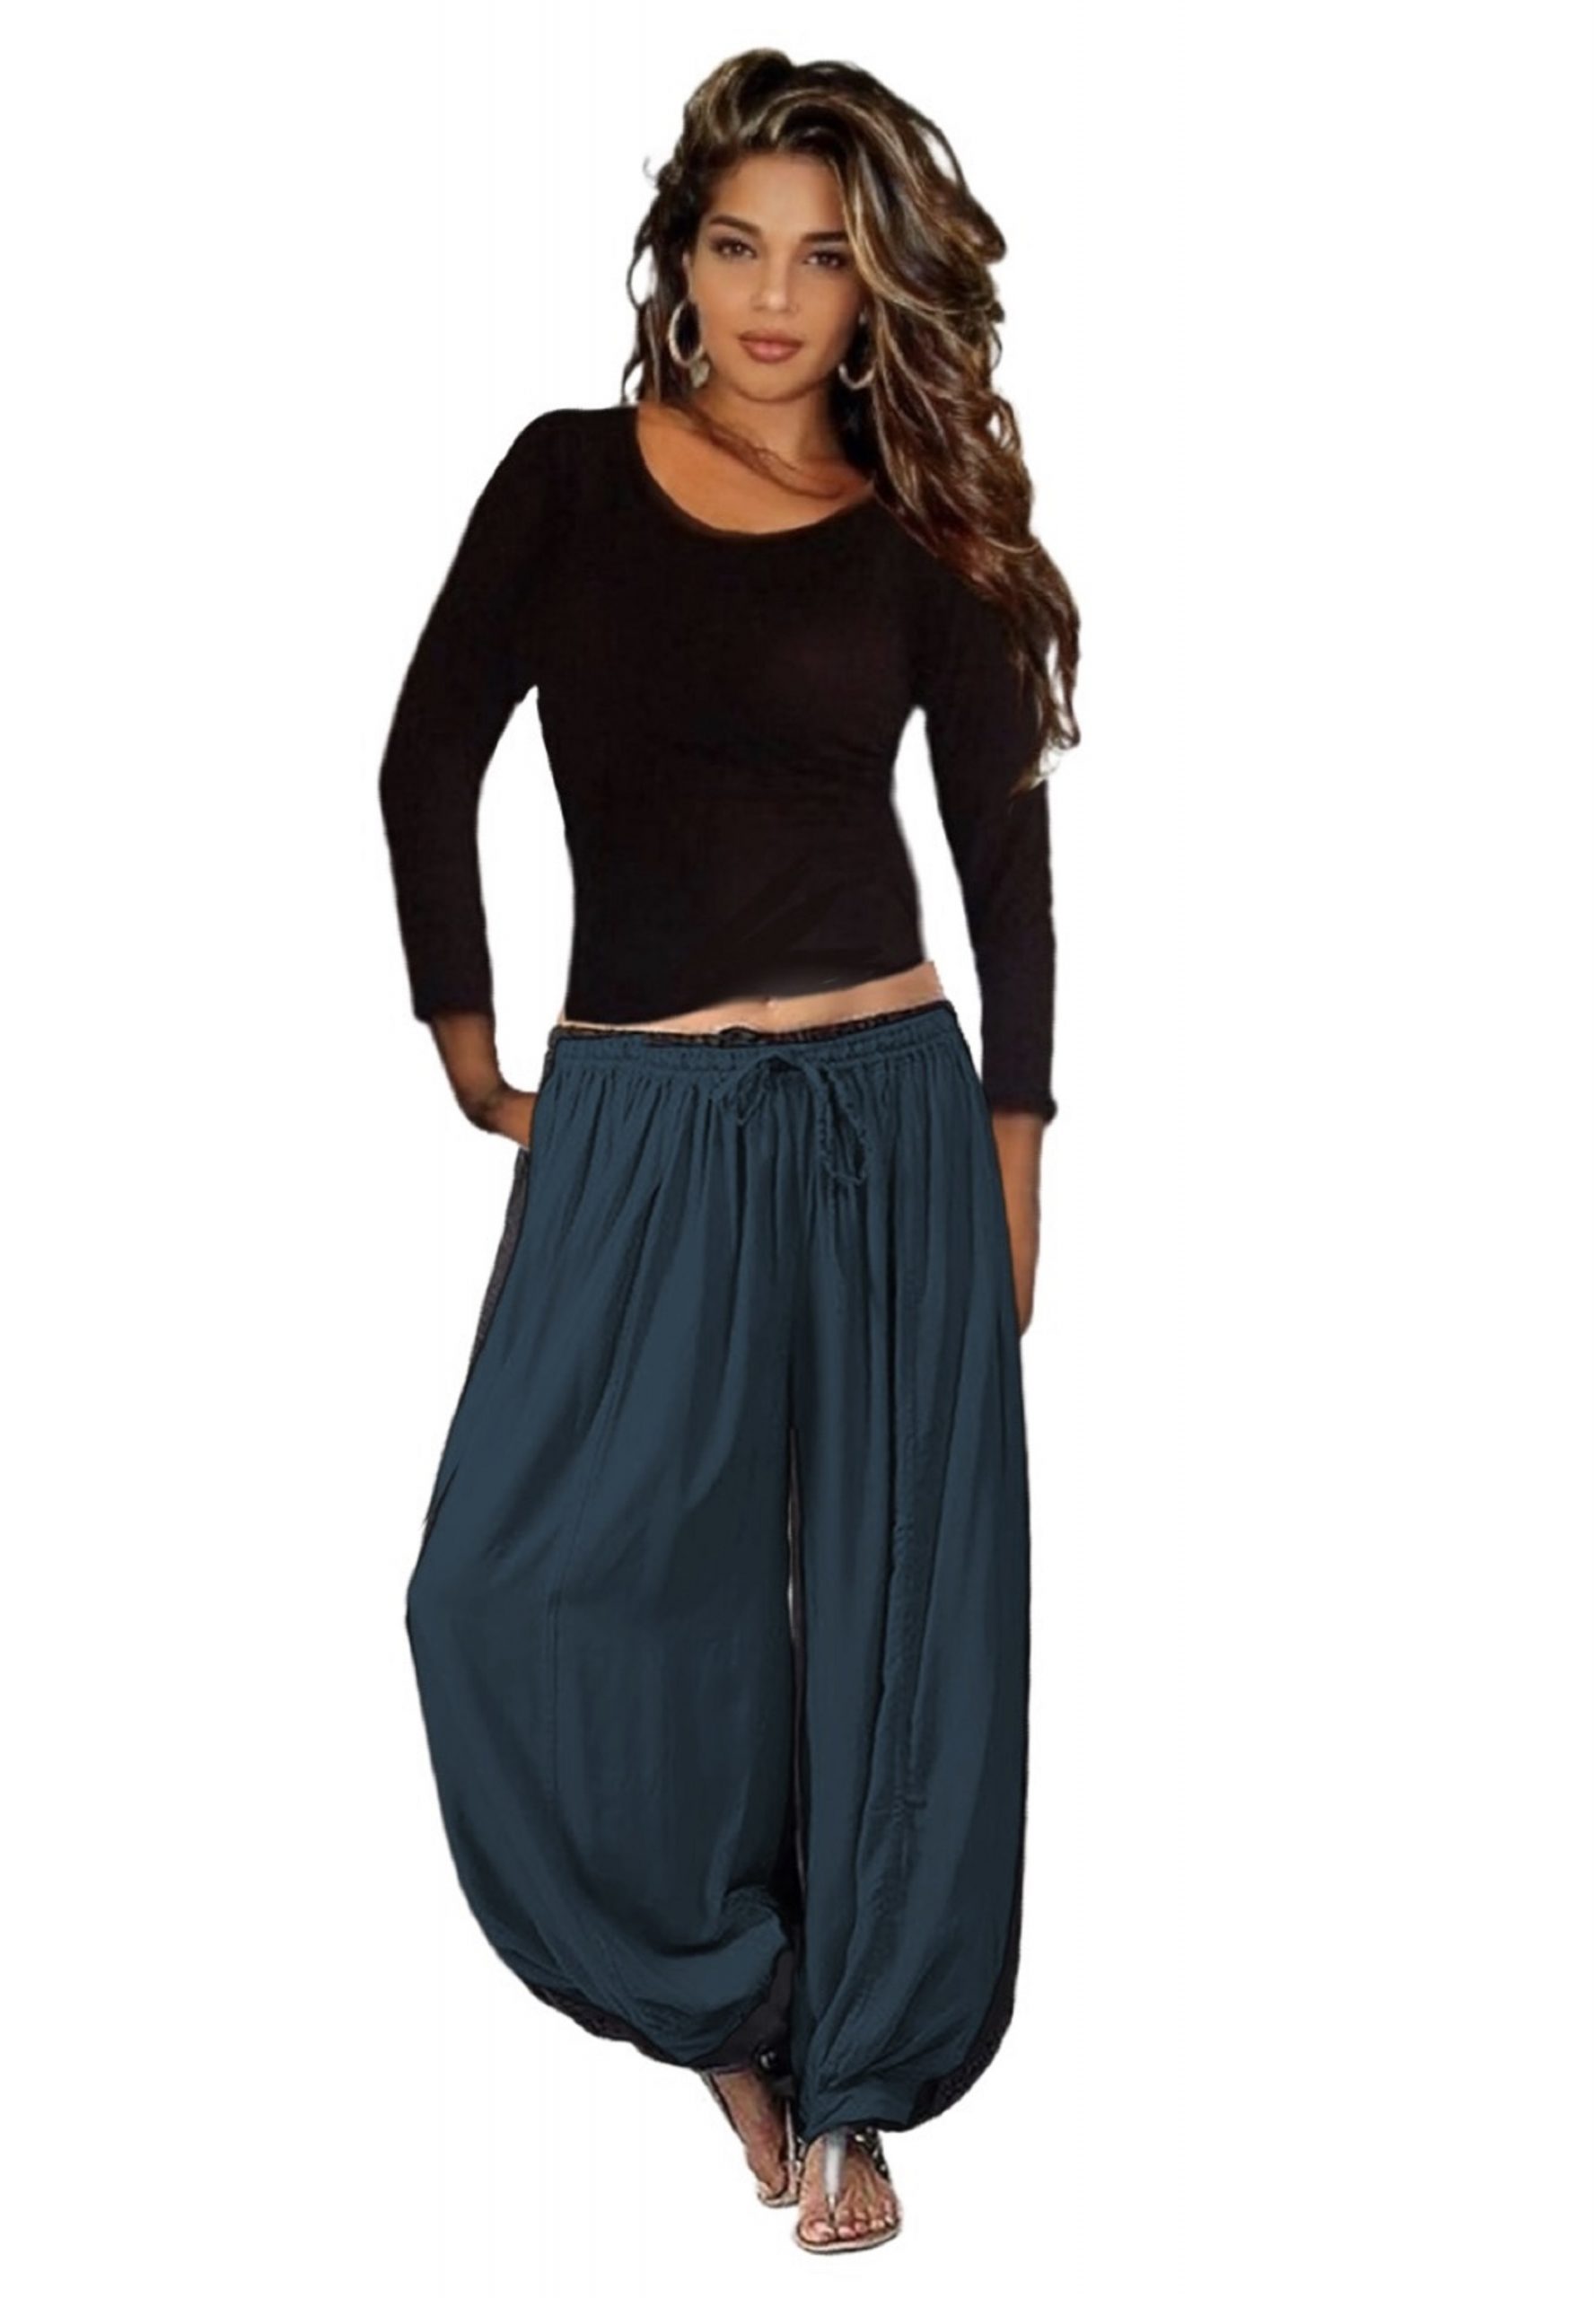 Casual Drawstring Solid Harem Pants  Pants for women, Boho outfits, Casual